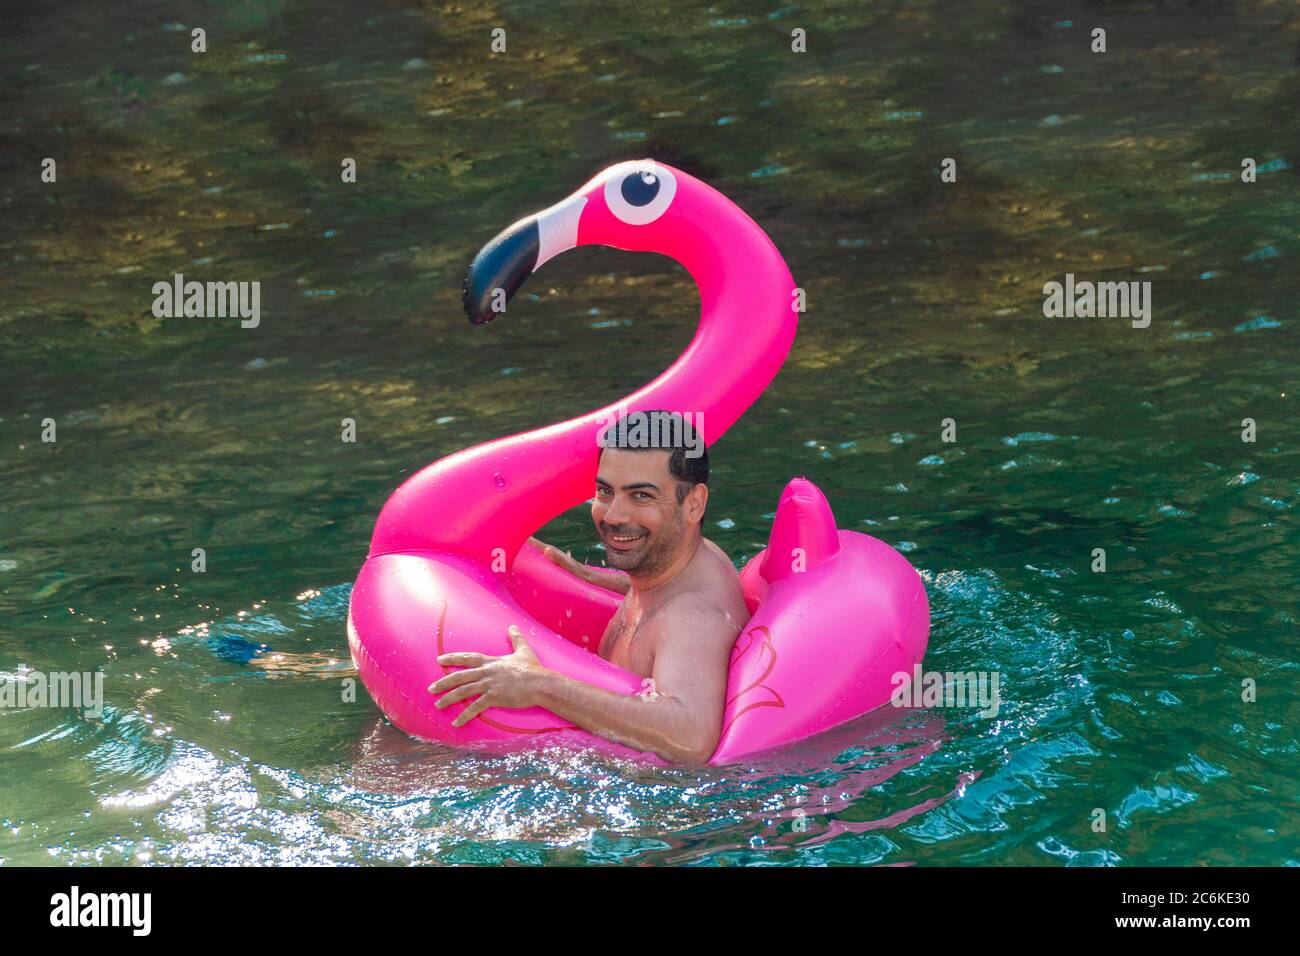 Cute and funny man enjoying on his inflated pink flamingo in sunny day. Stock Photo